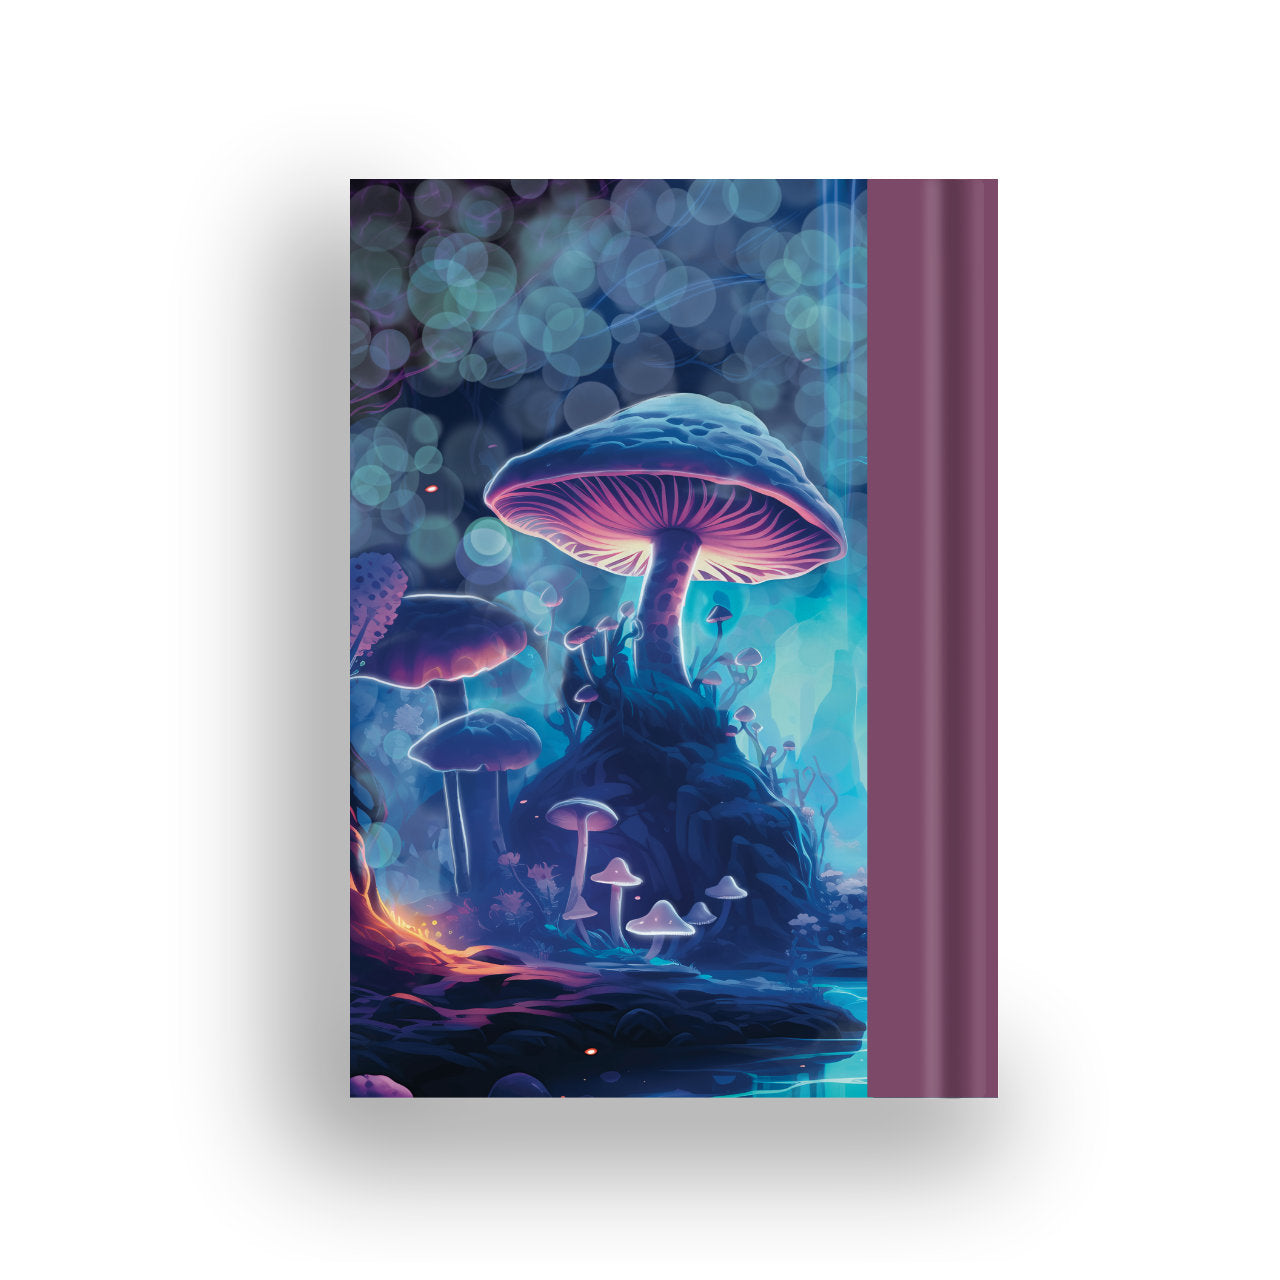 Shrooms notebook rear cover with mushroom forest illustration